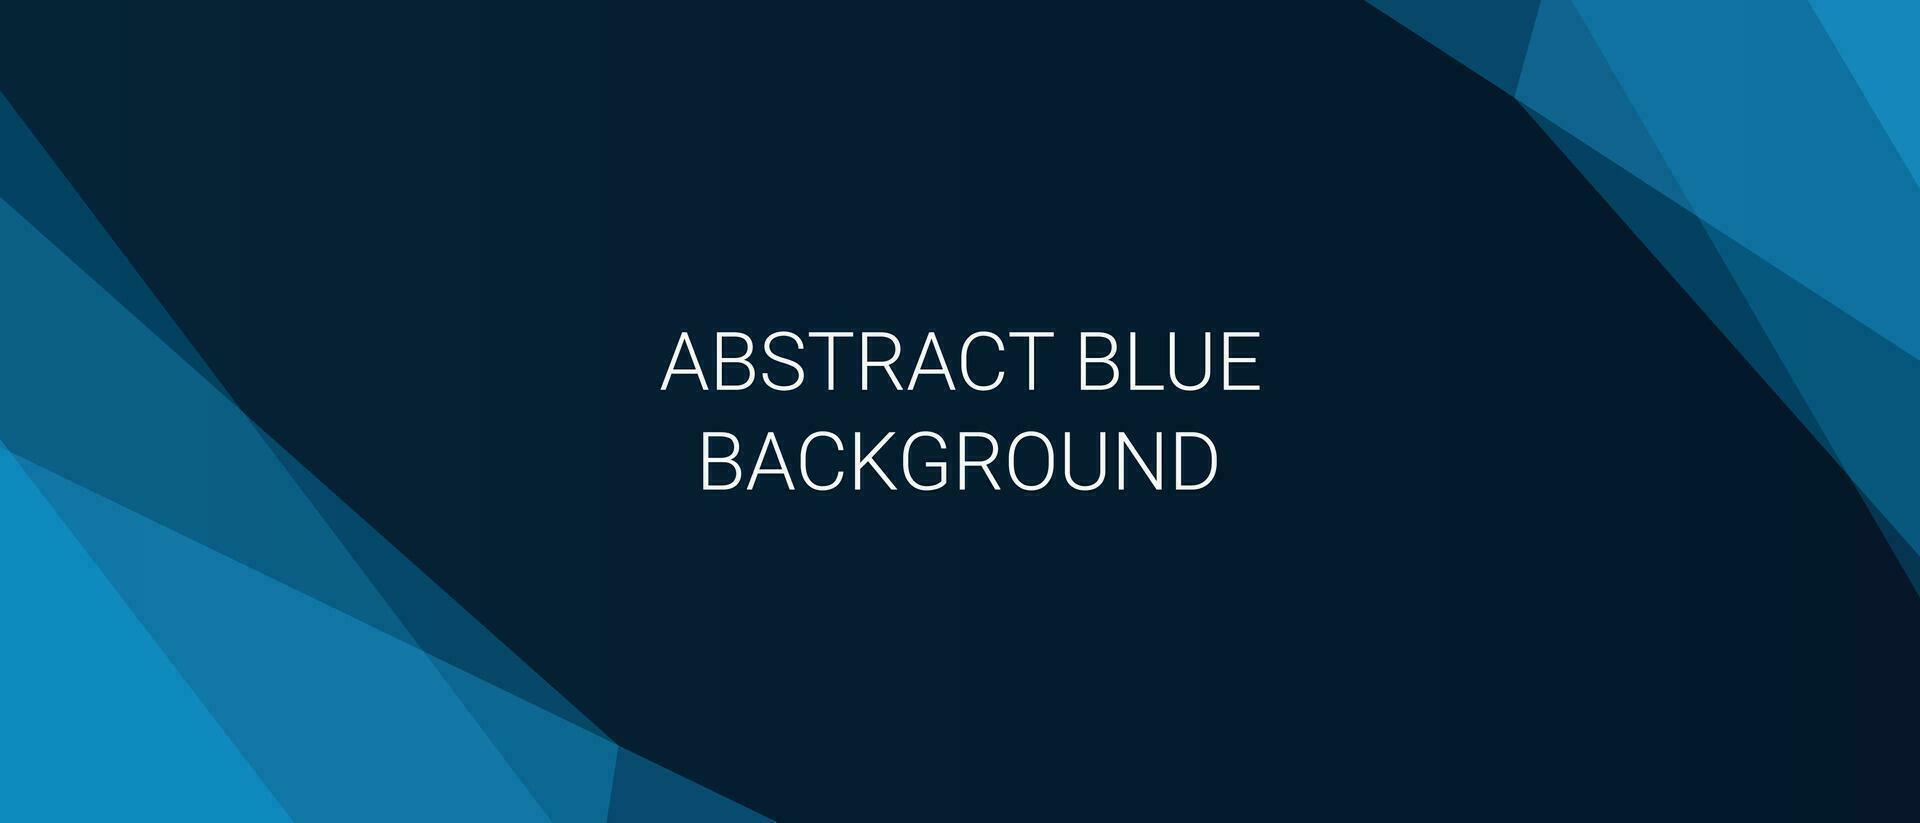 blue abstract background with triangles template vector design